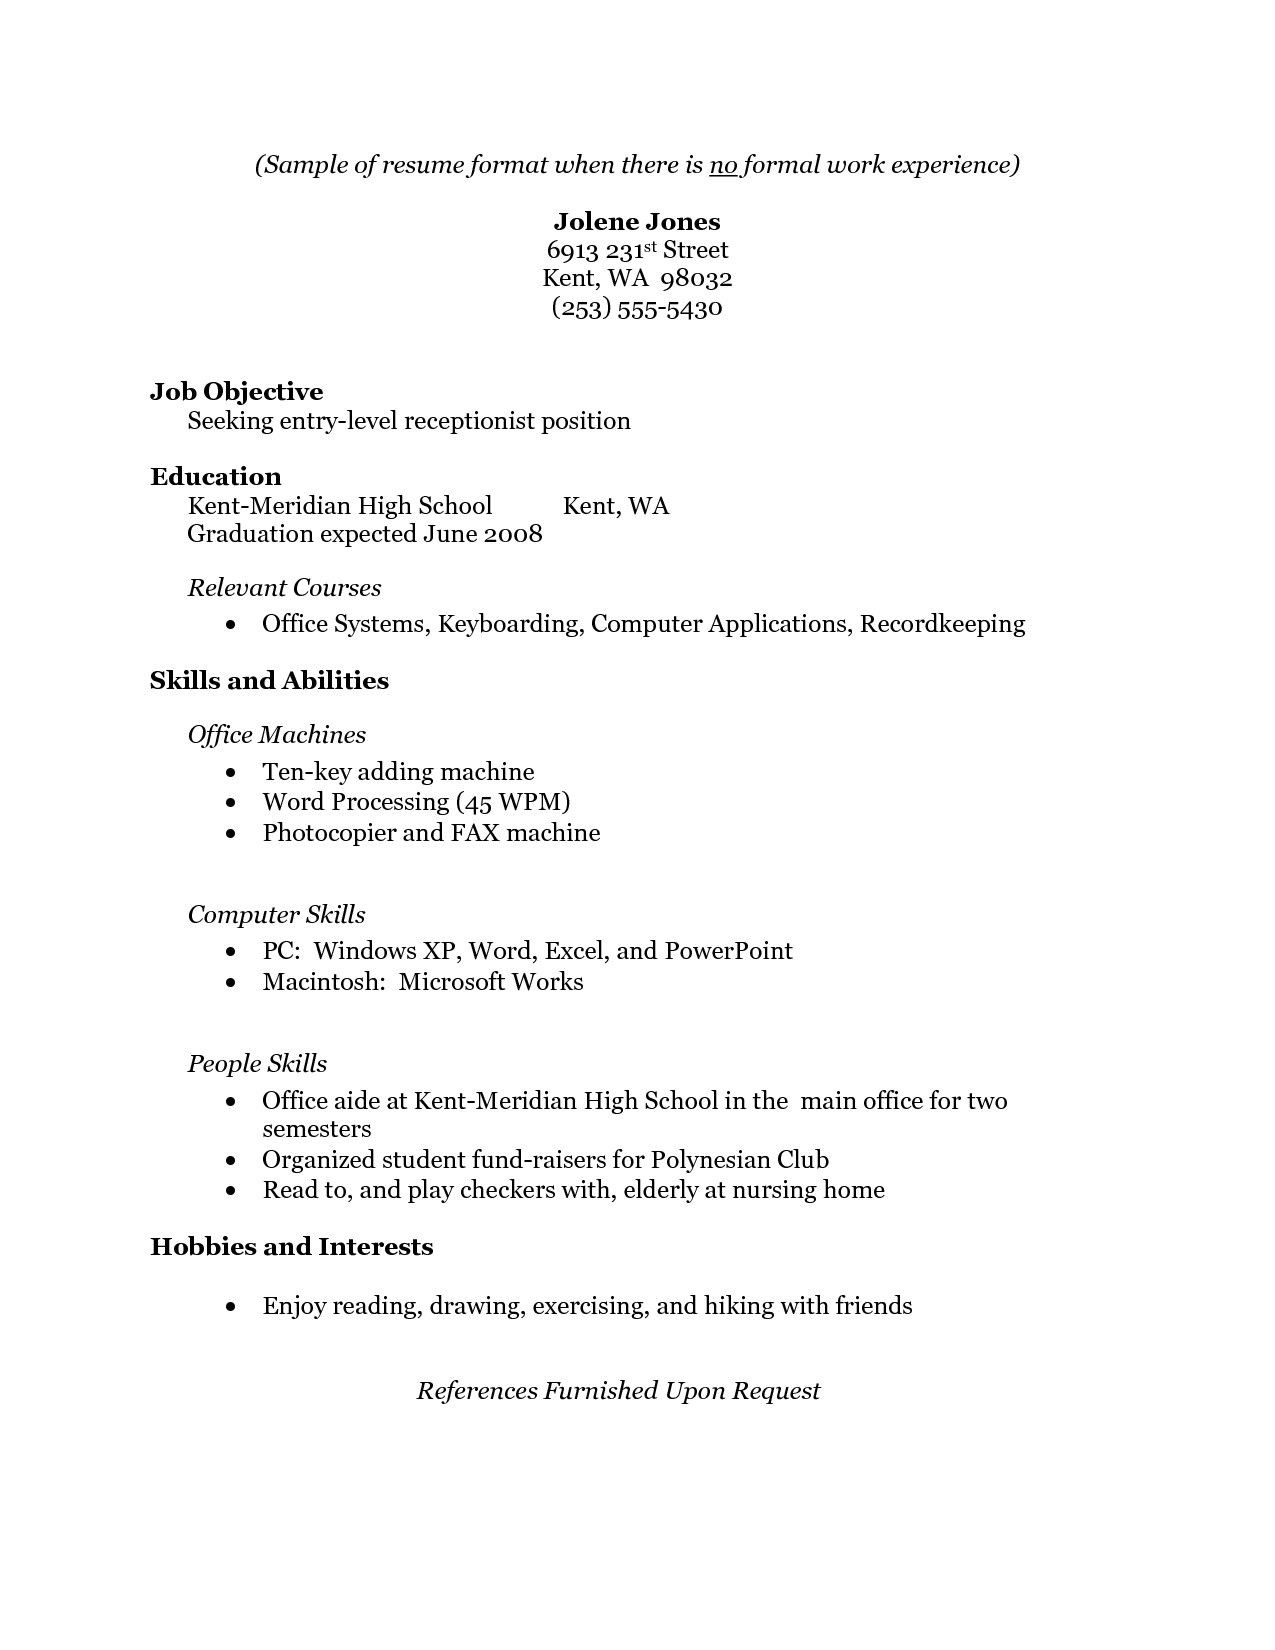 Sample Resume for Teenager with No Experience Free Resume Templates No Work Experience #experience …